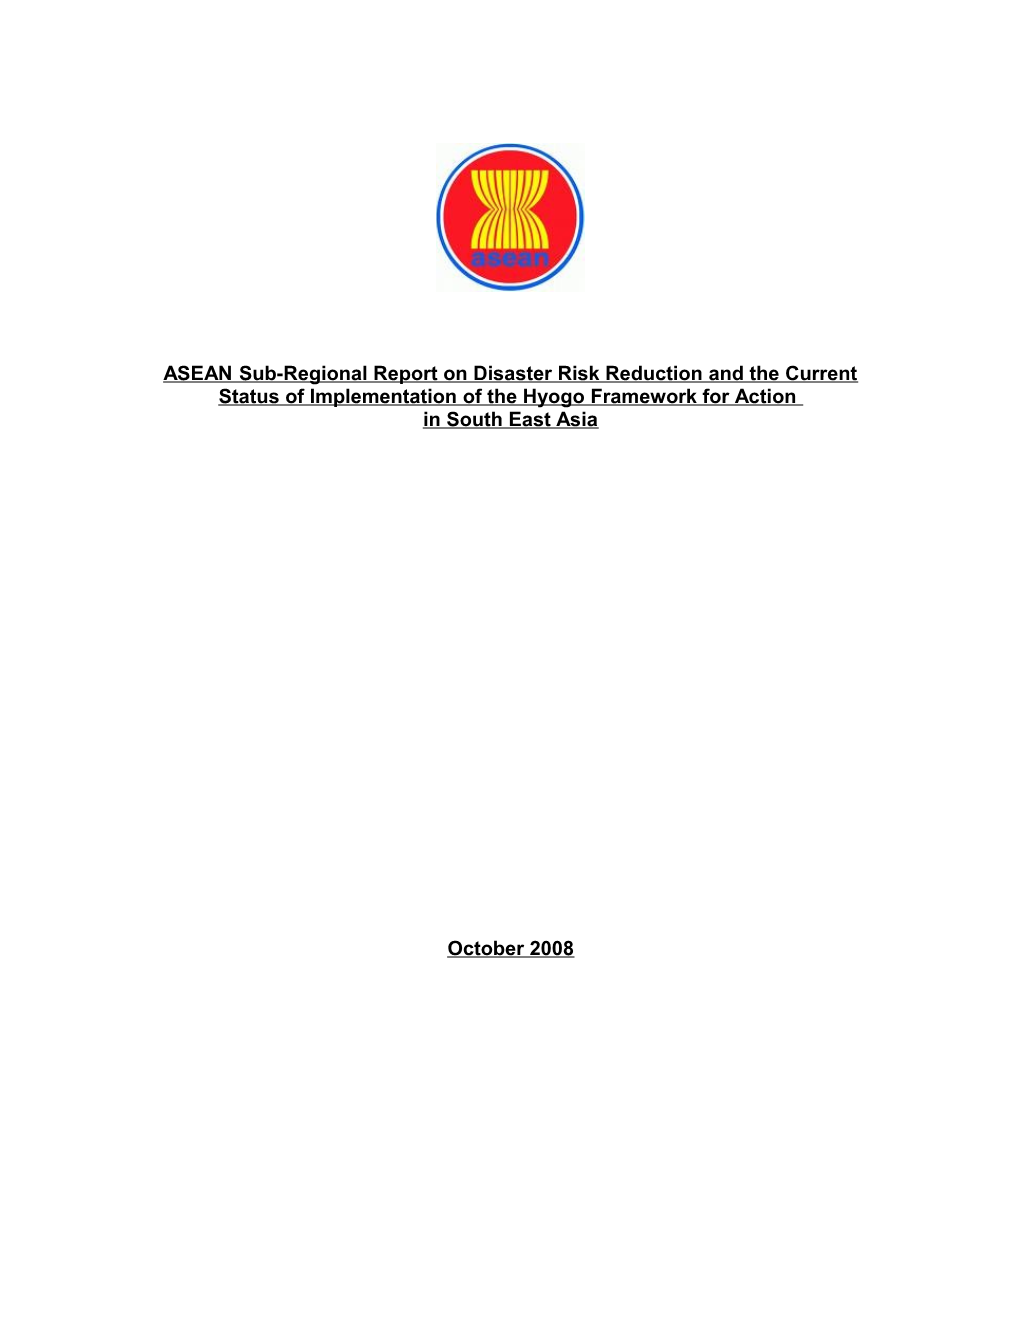 ASEAN Sub-Regional Report on Disaster Risk Reduction and the Implementation of the Hyogo